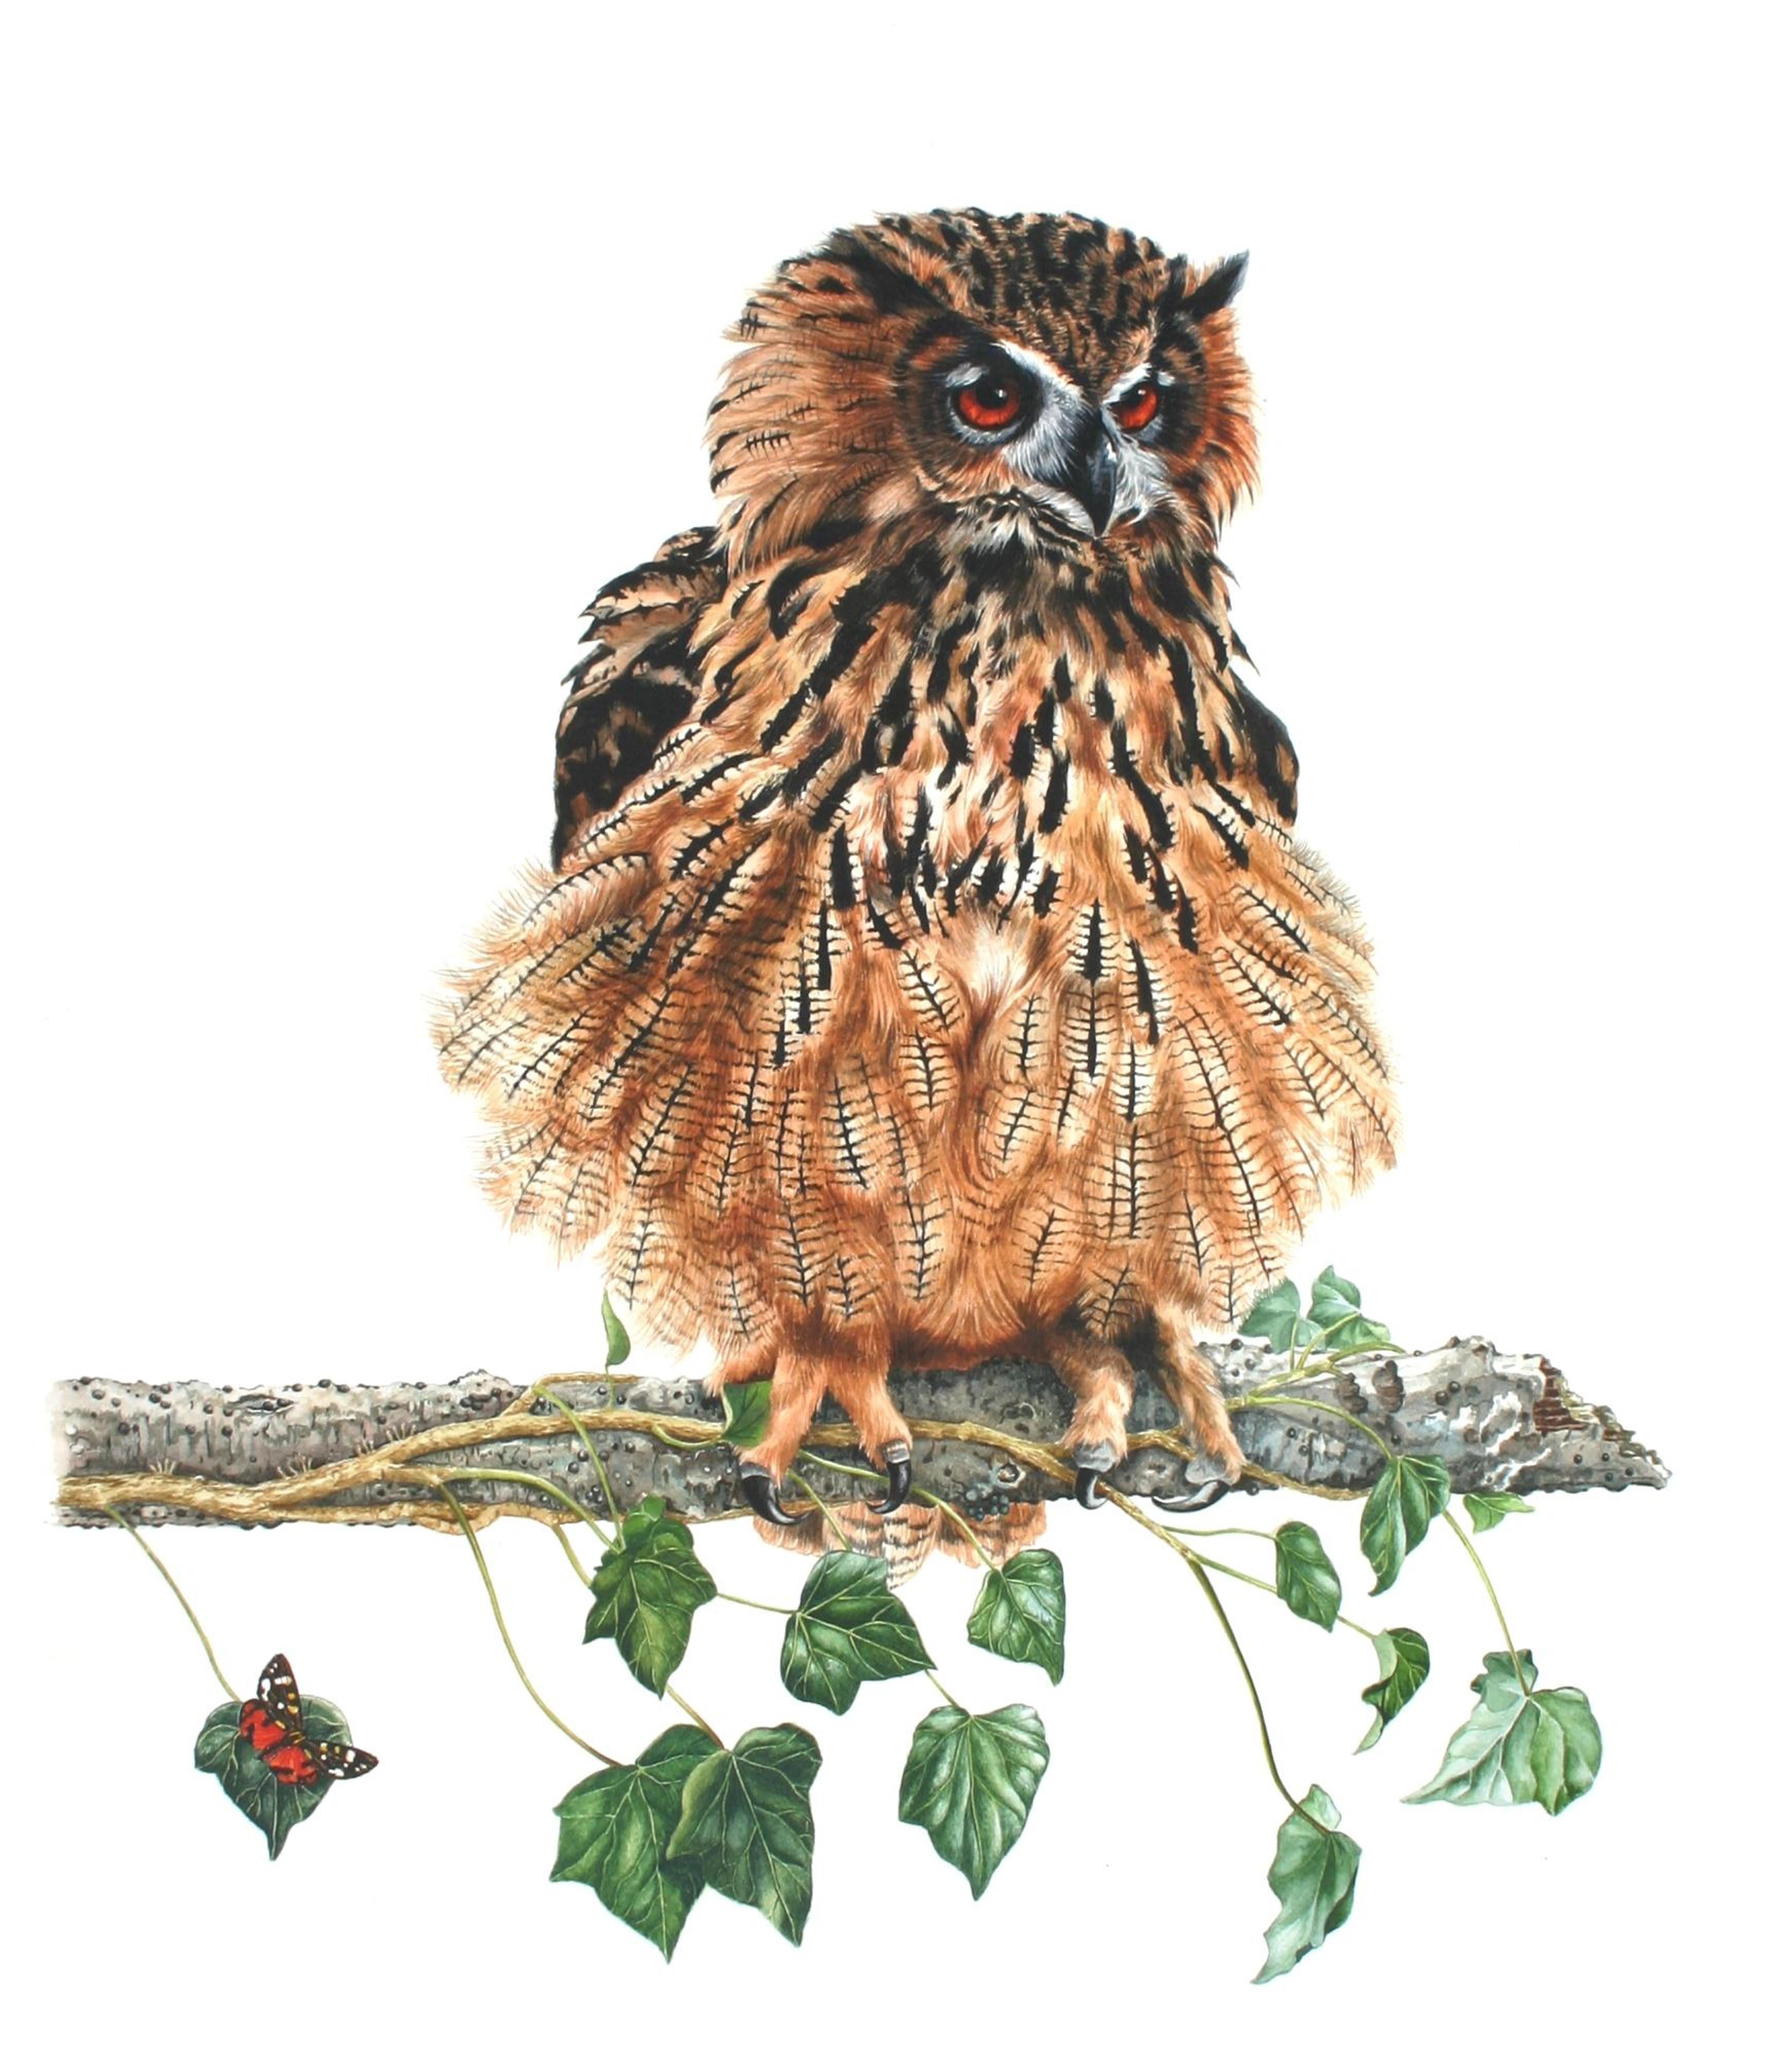 Eagle Owl, Painting, Watercolor on Paper